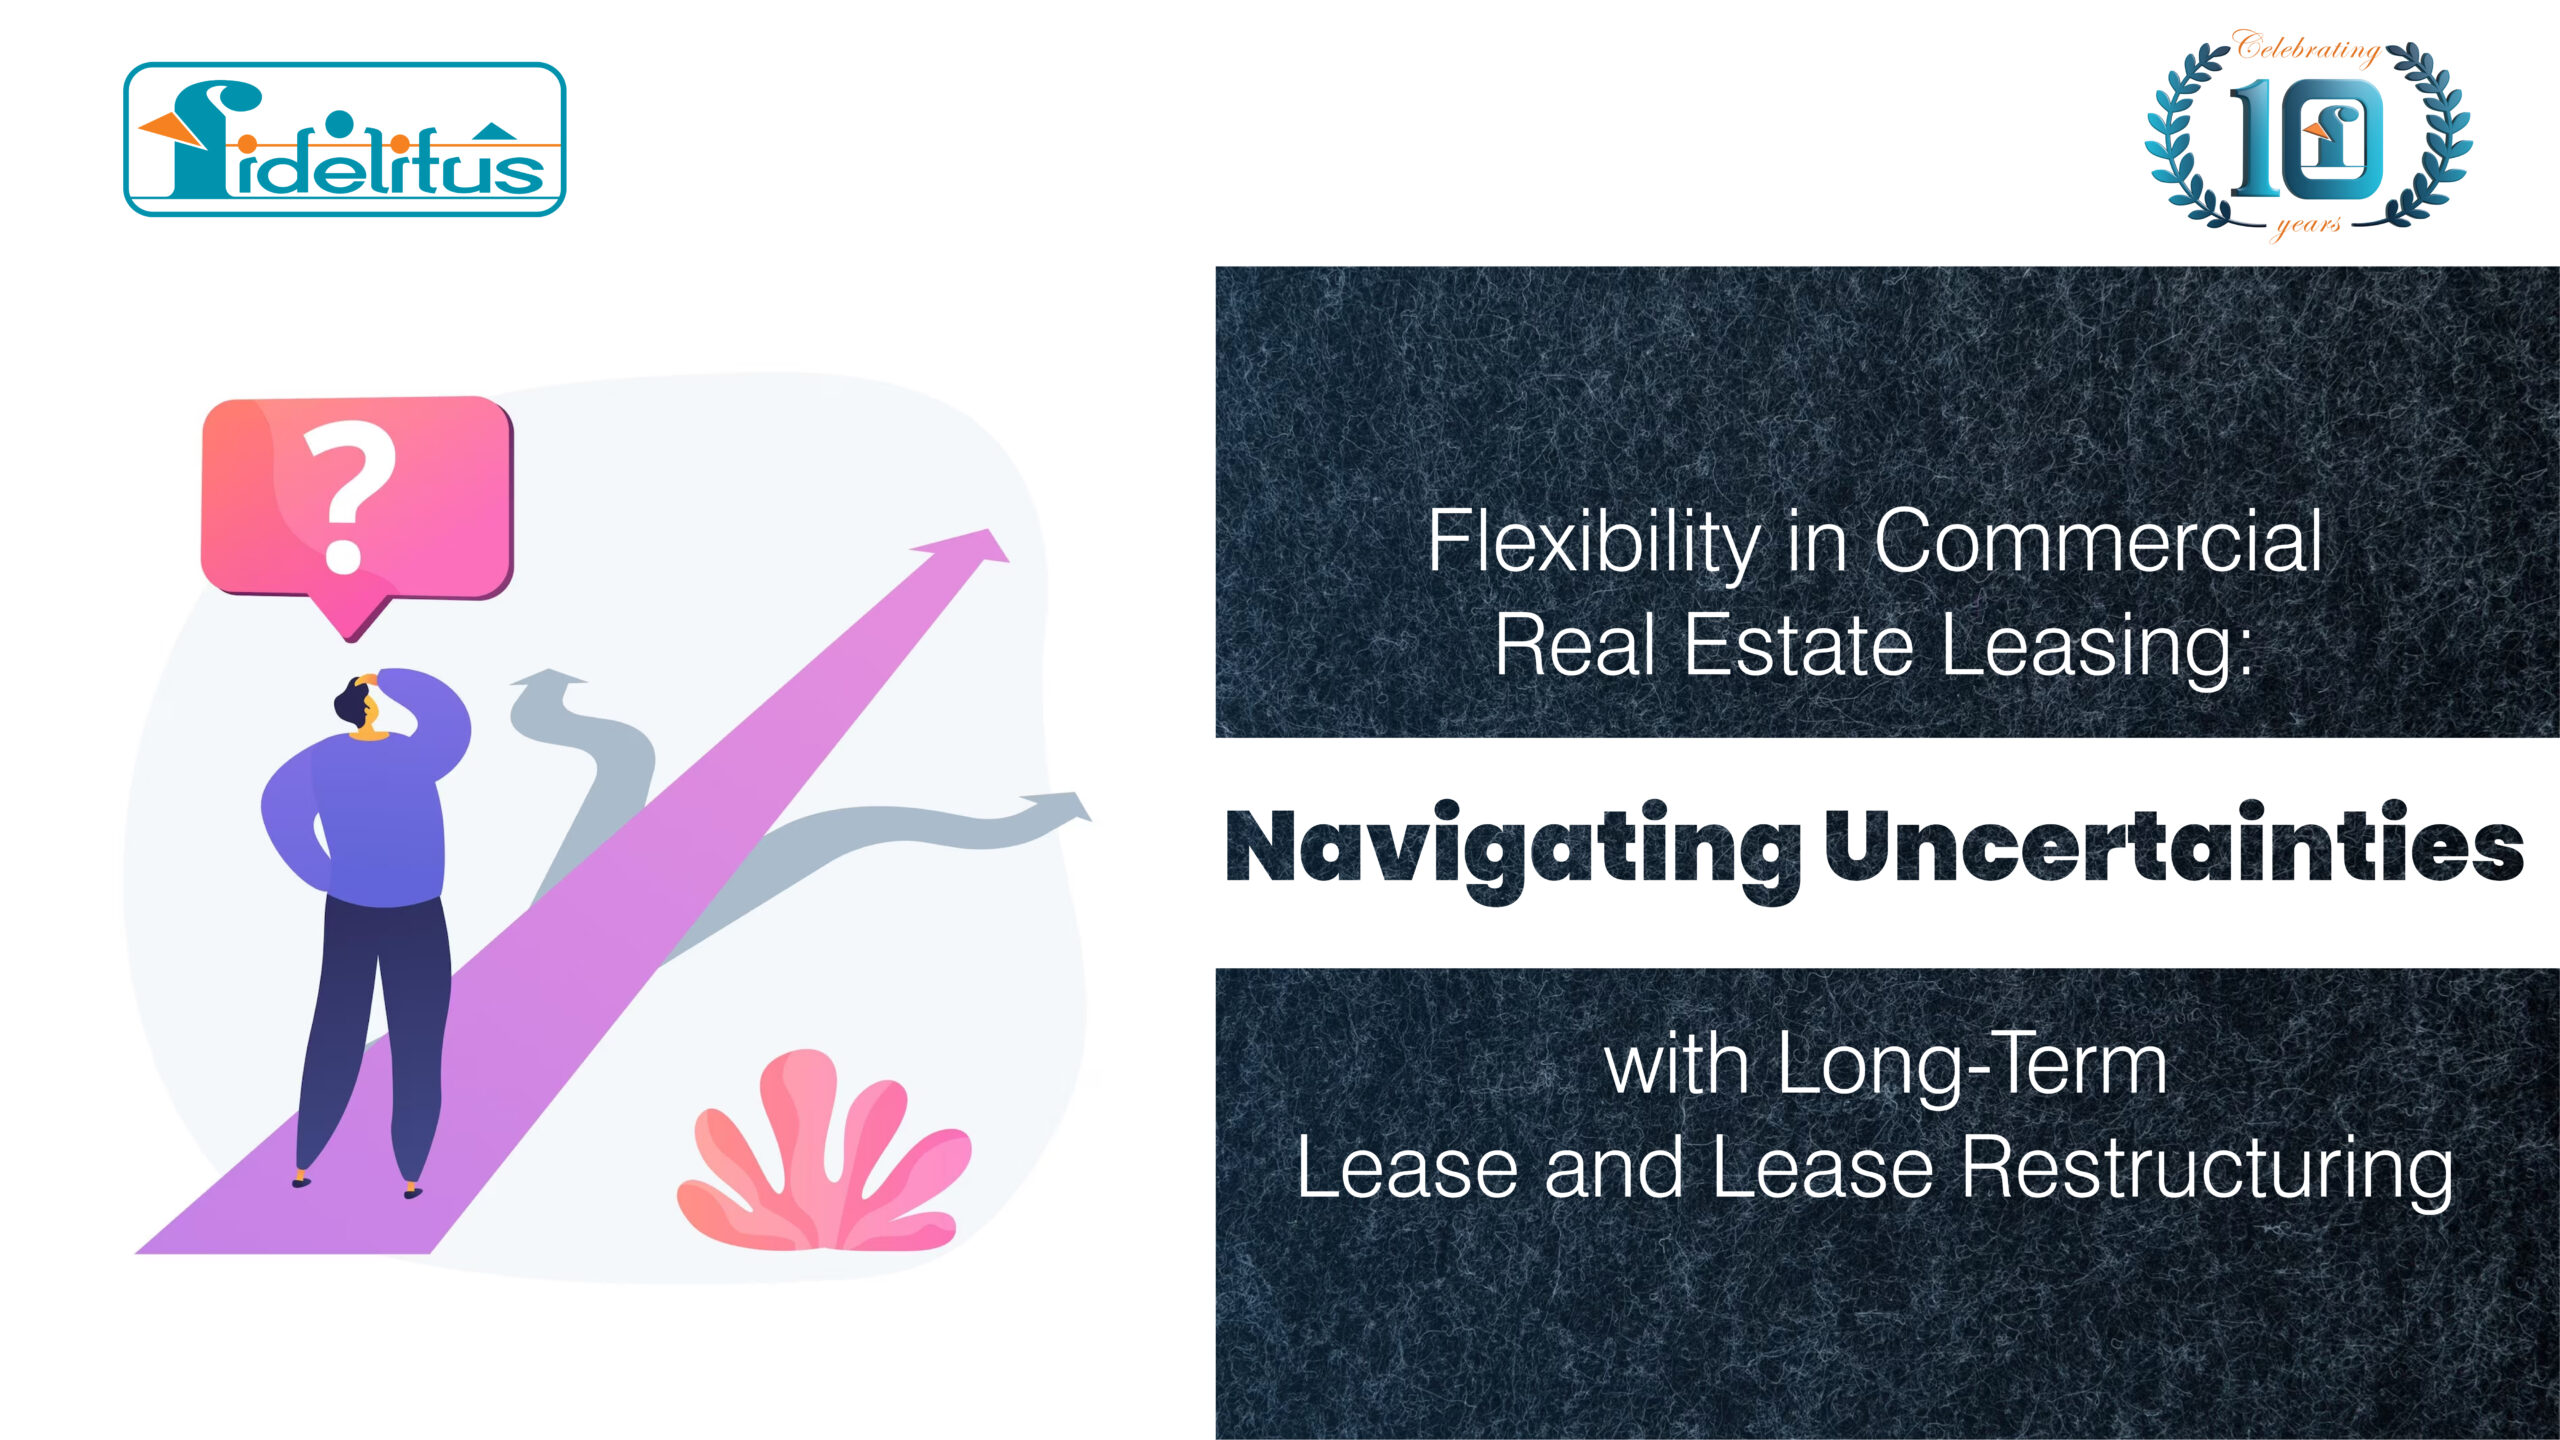 You are currently viewing Flexibility in Commercial Real Estate Leasing: Navigating Uncertainties with Long-Term Lease and Lease Restructuring